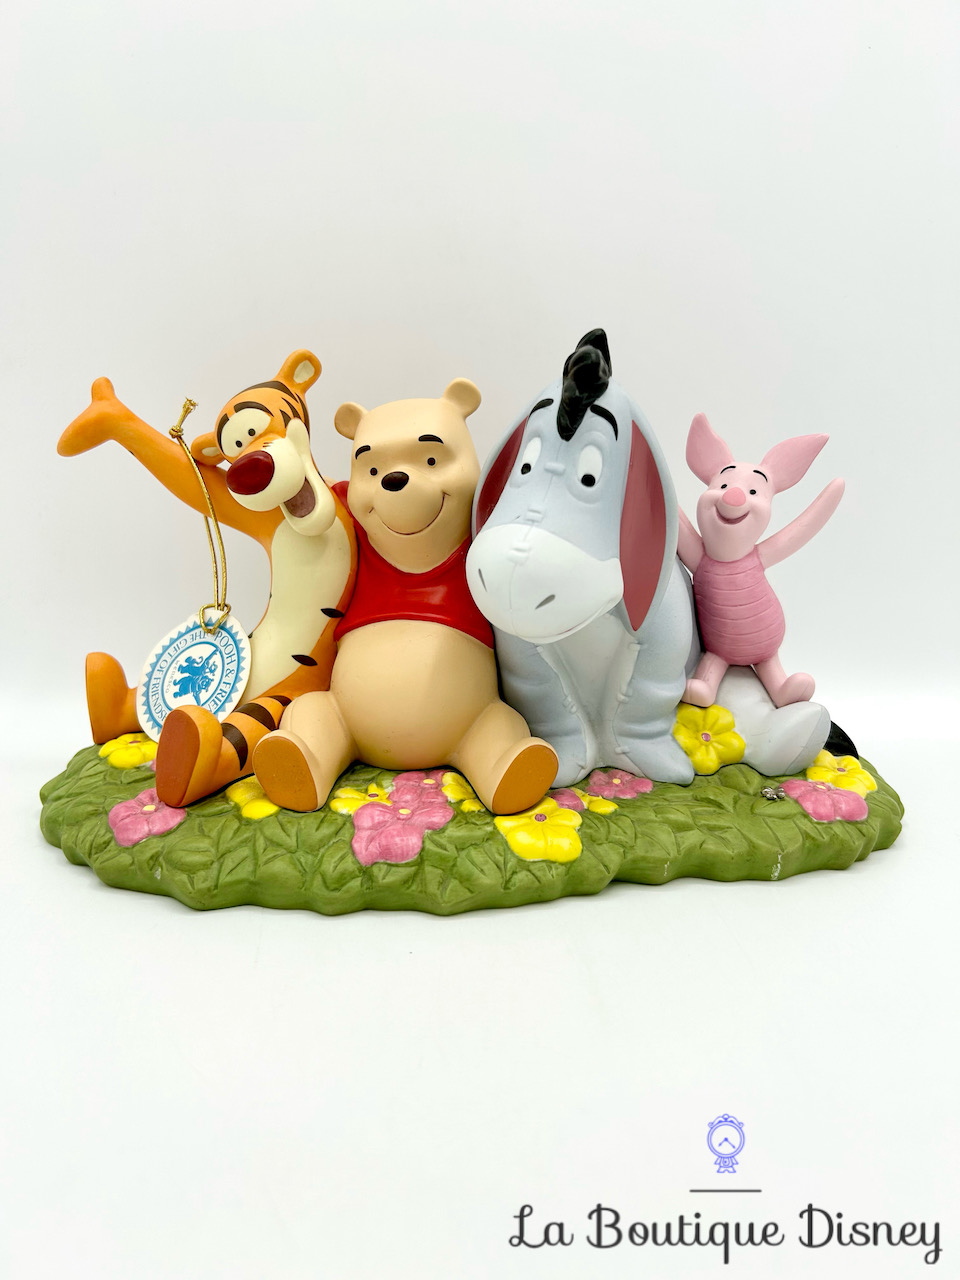 Figurine 10 Years of Friendship Pooh & Friends Disney Enesco 4011759 Limited Edition Winnie l\'ourson et ses amis